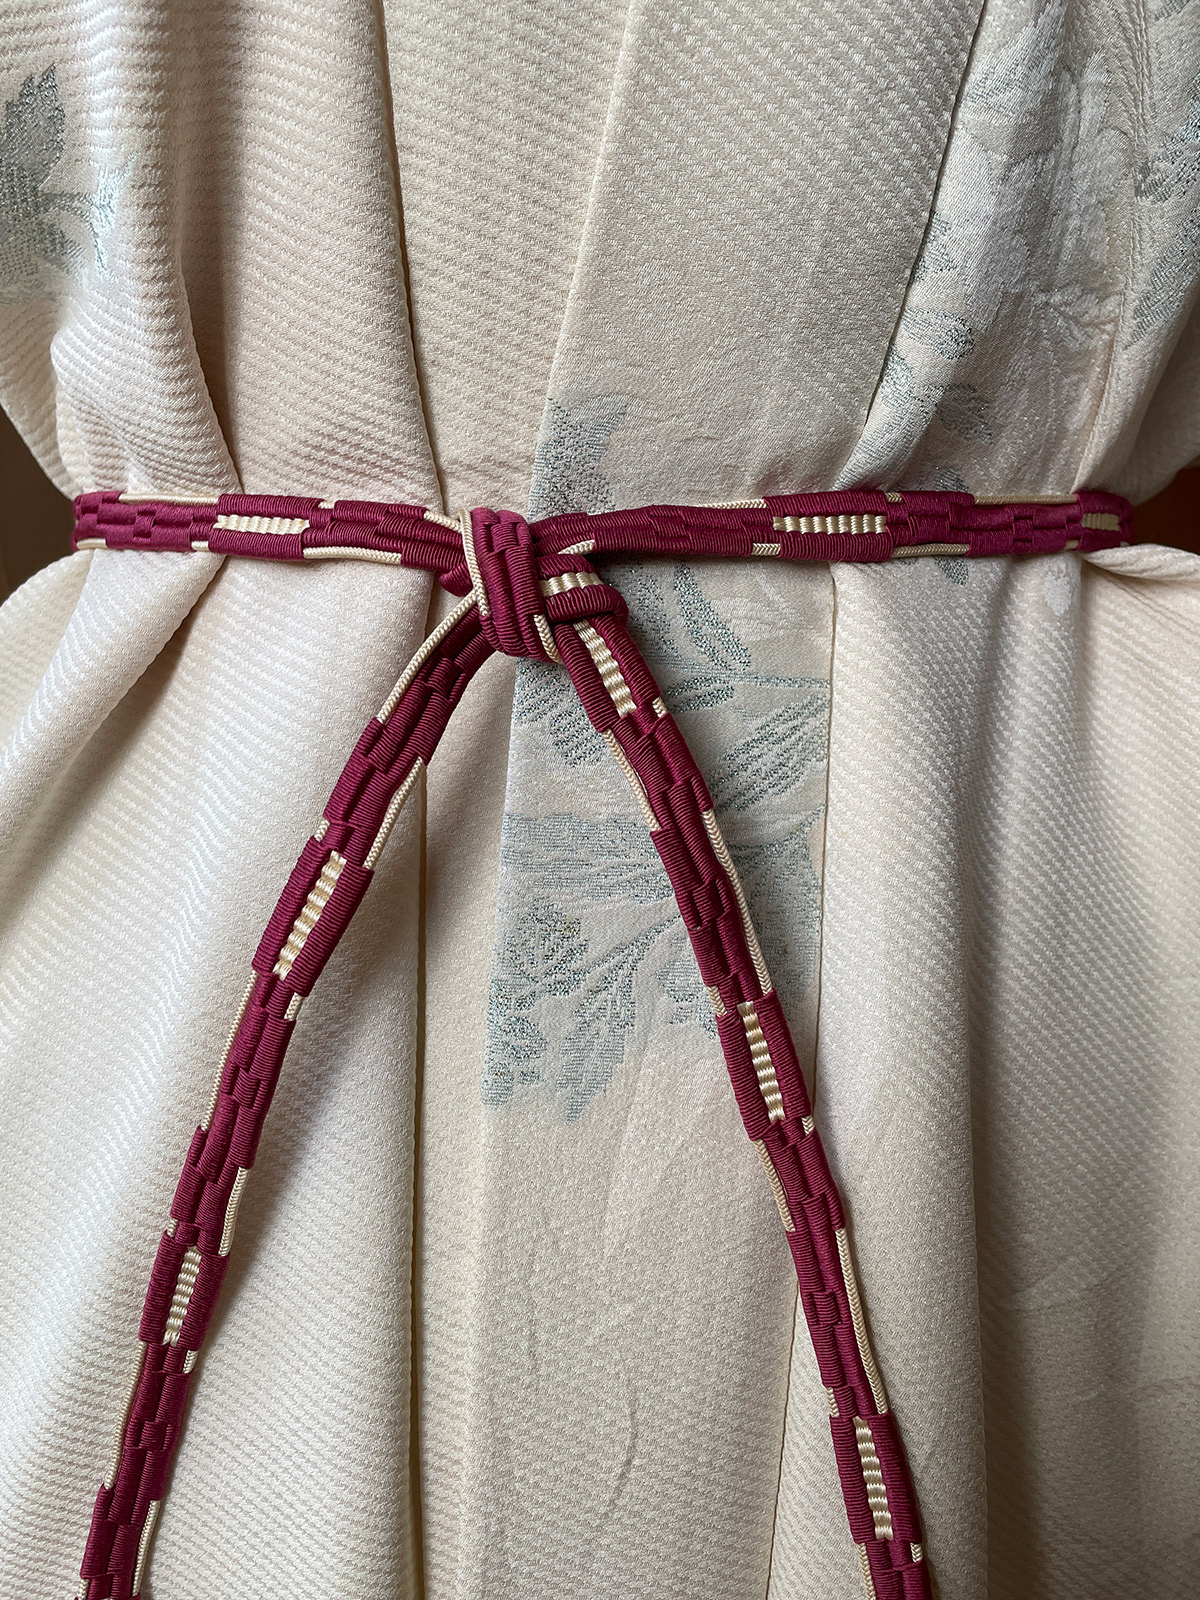 Cleverly woven silk obijime cord in wine red and beige